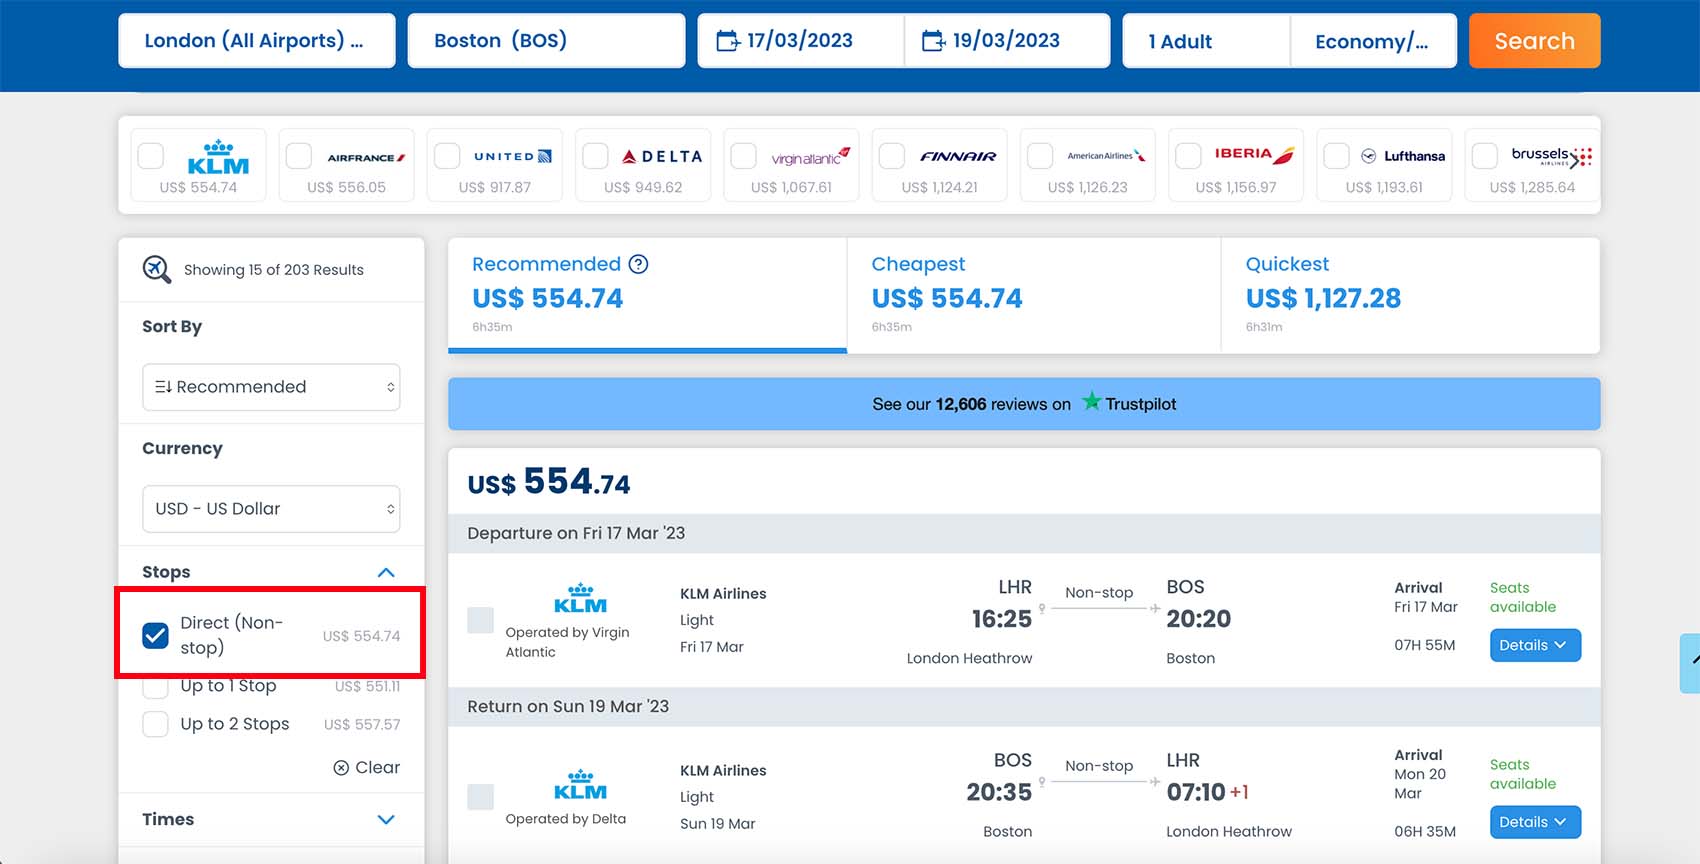 Select Direct (Non-stop) flights